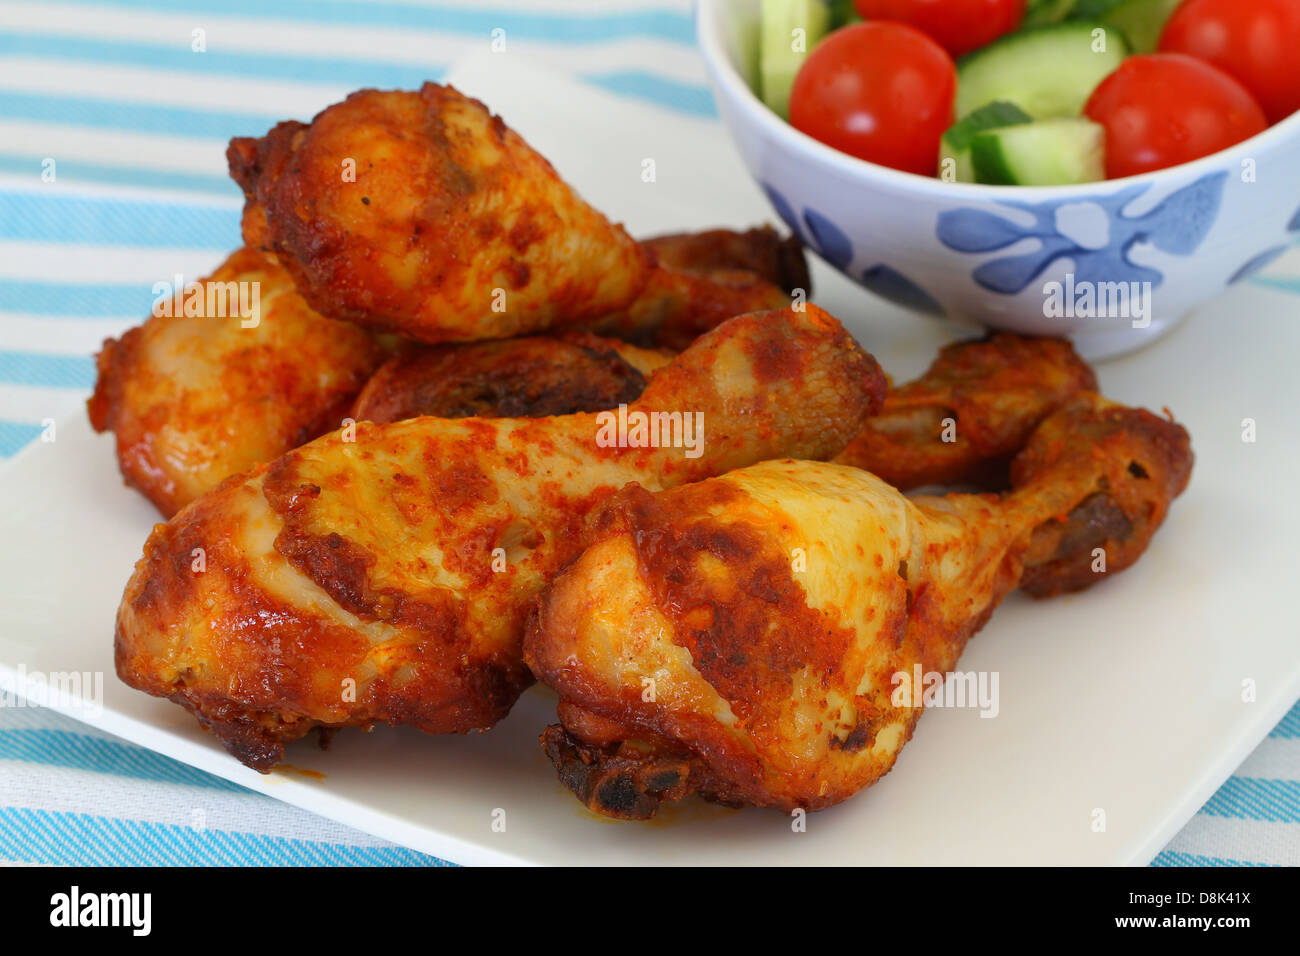 Roasted chicken drumsticks on vintage plate, close up Stock Photo